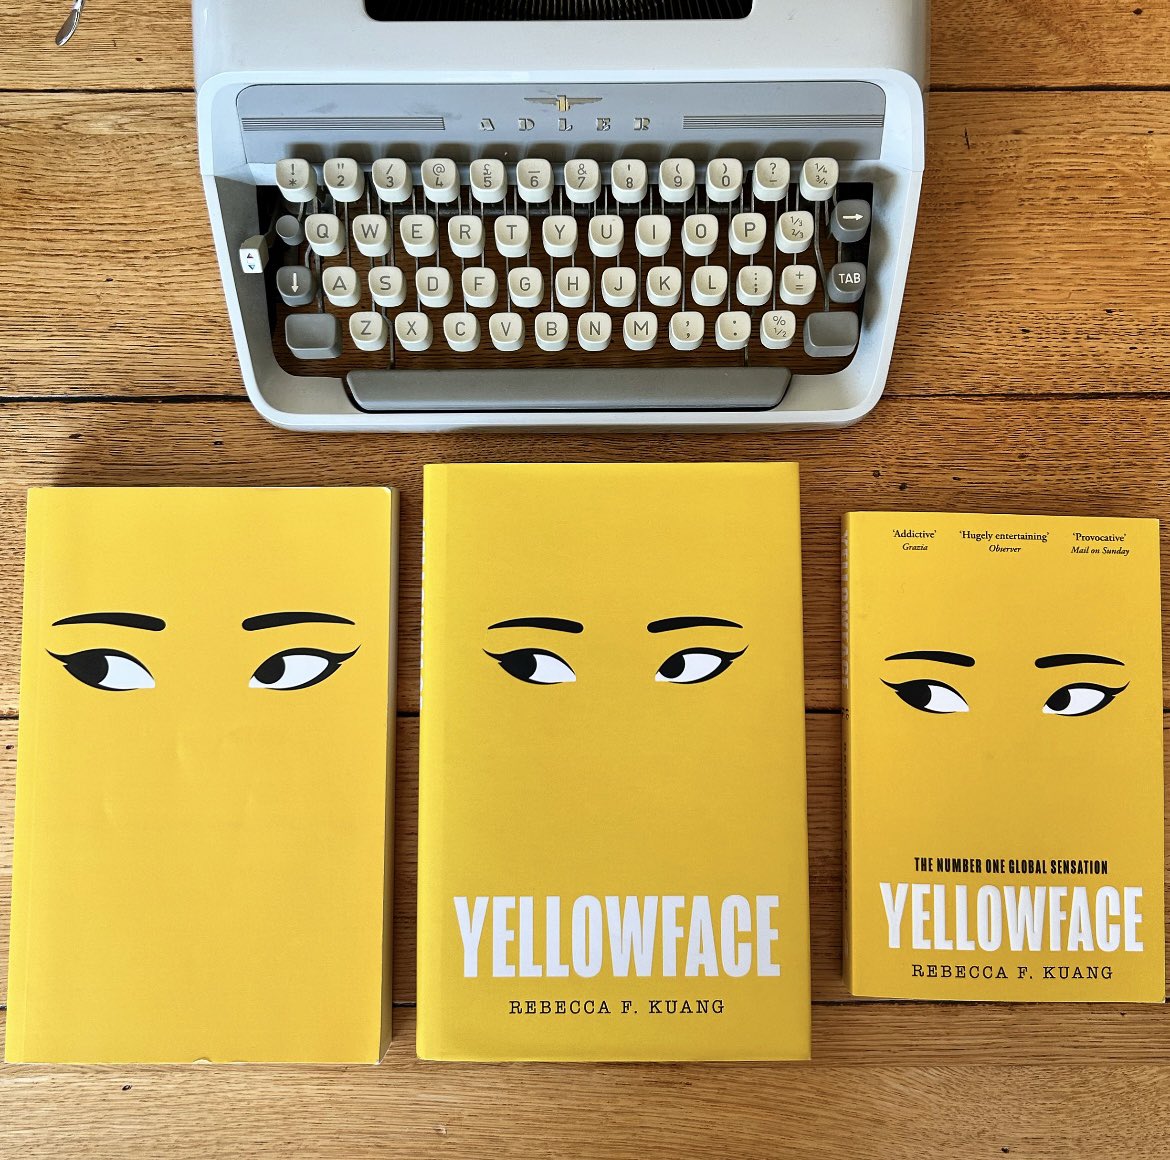 From proof, to hardback, to our glorious new paperback! 💛 Who is delving into #Yellowface this weekend? The perfect paperback to devour in the sunshine 👀 Out now: smarturl.it/YellowfacePB